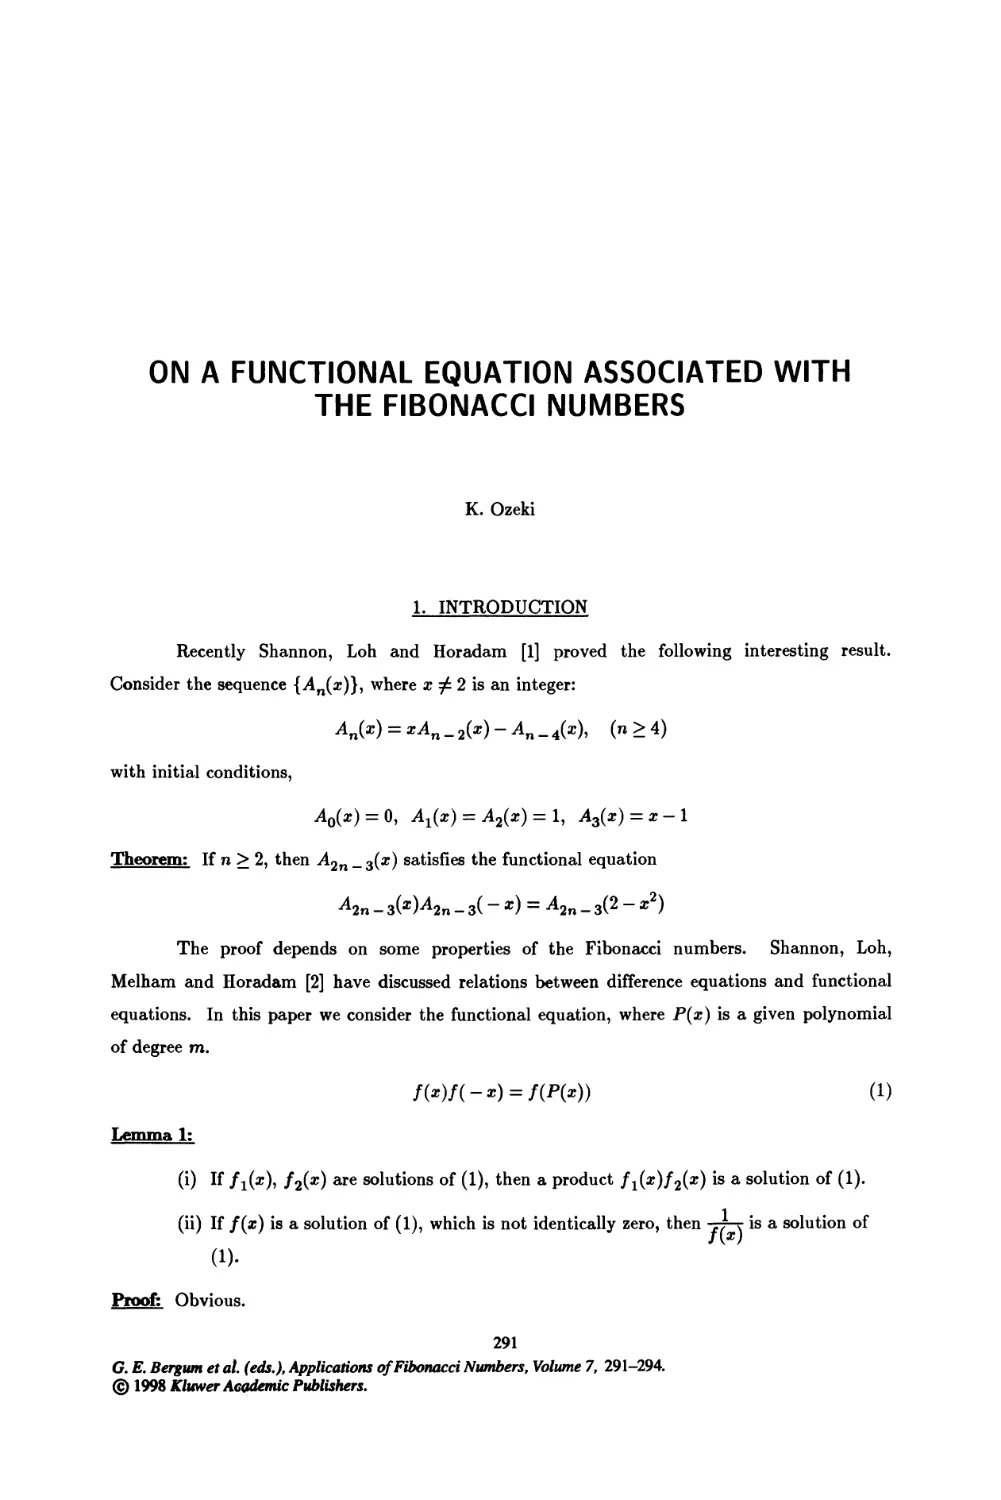 33. On a Functional Equation Associated with the Fibonacci Numbers